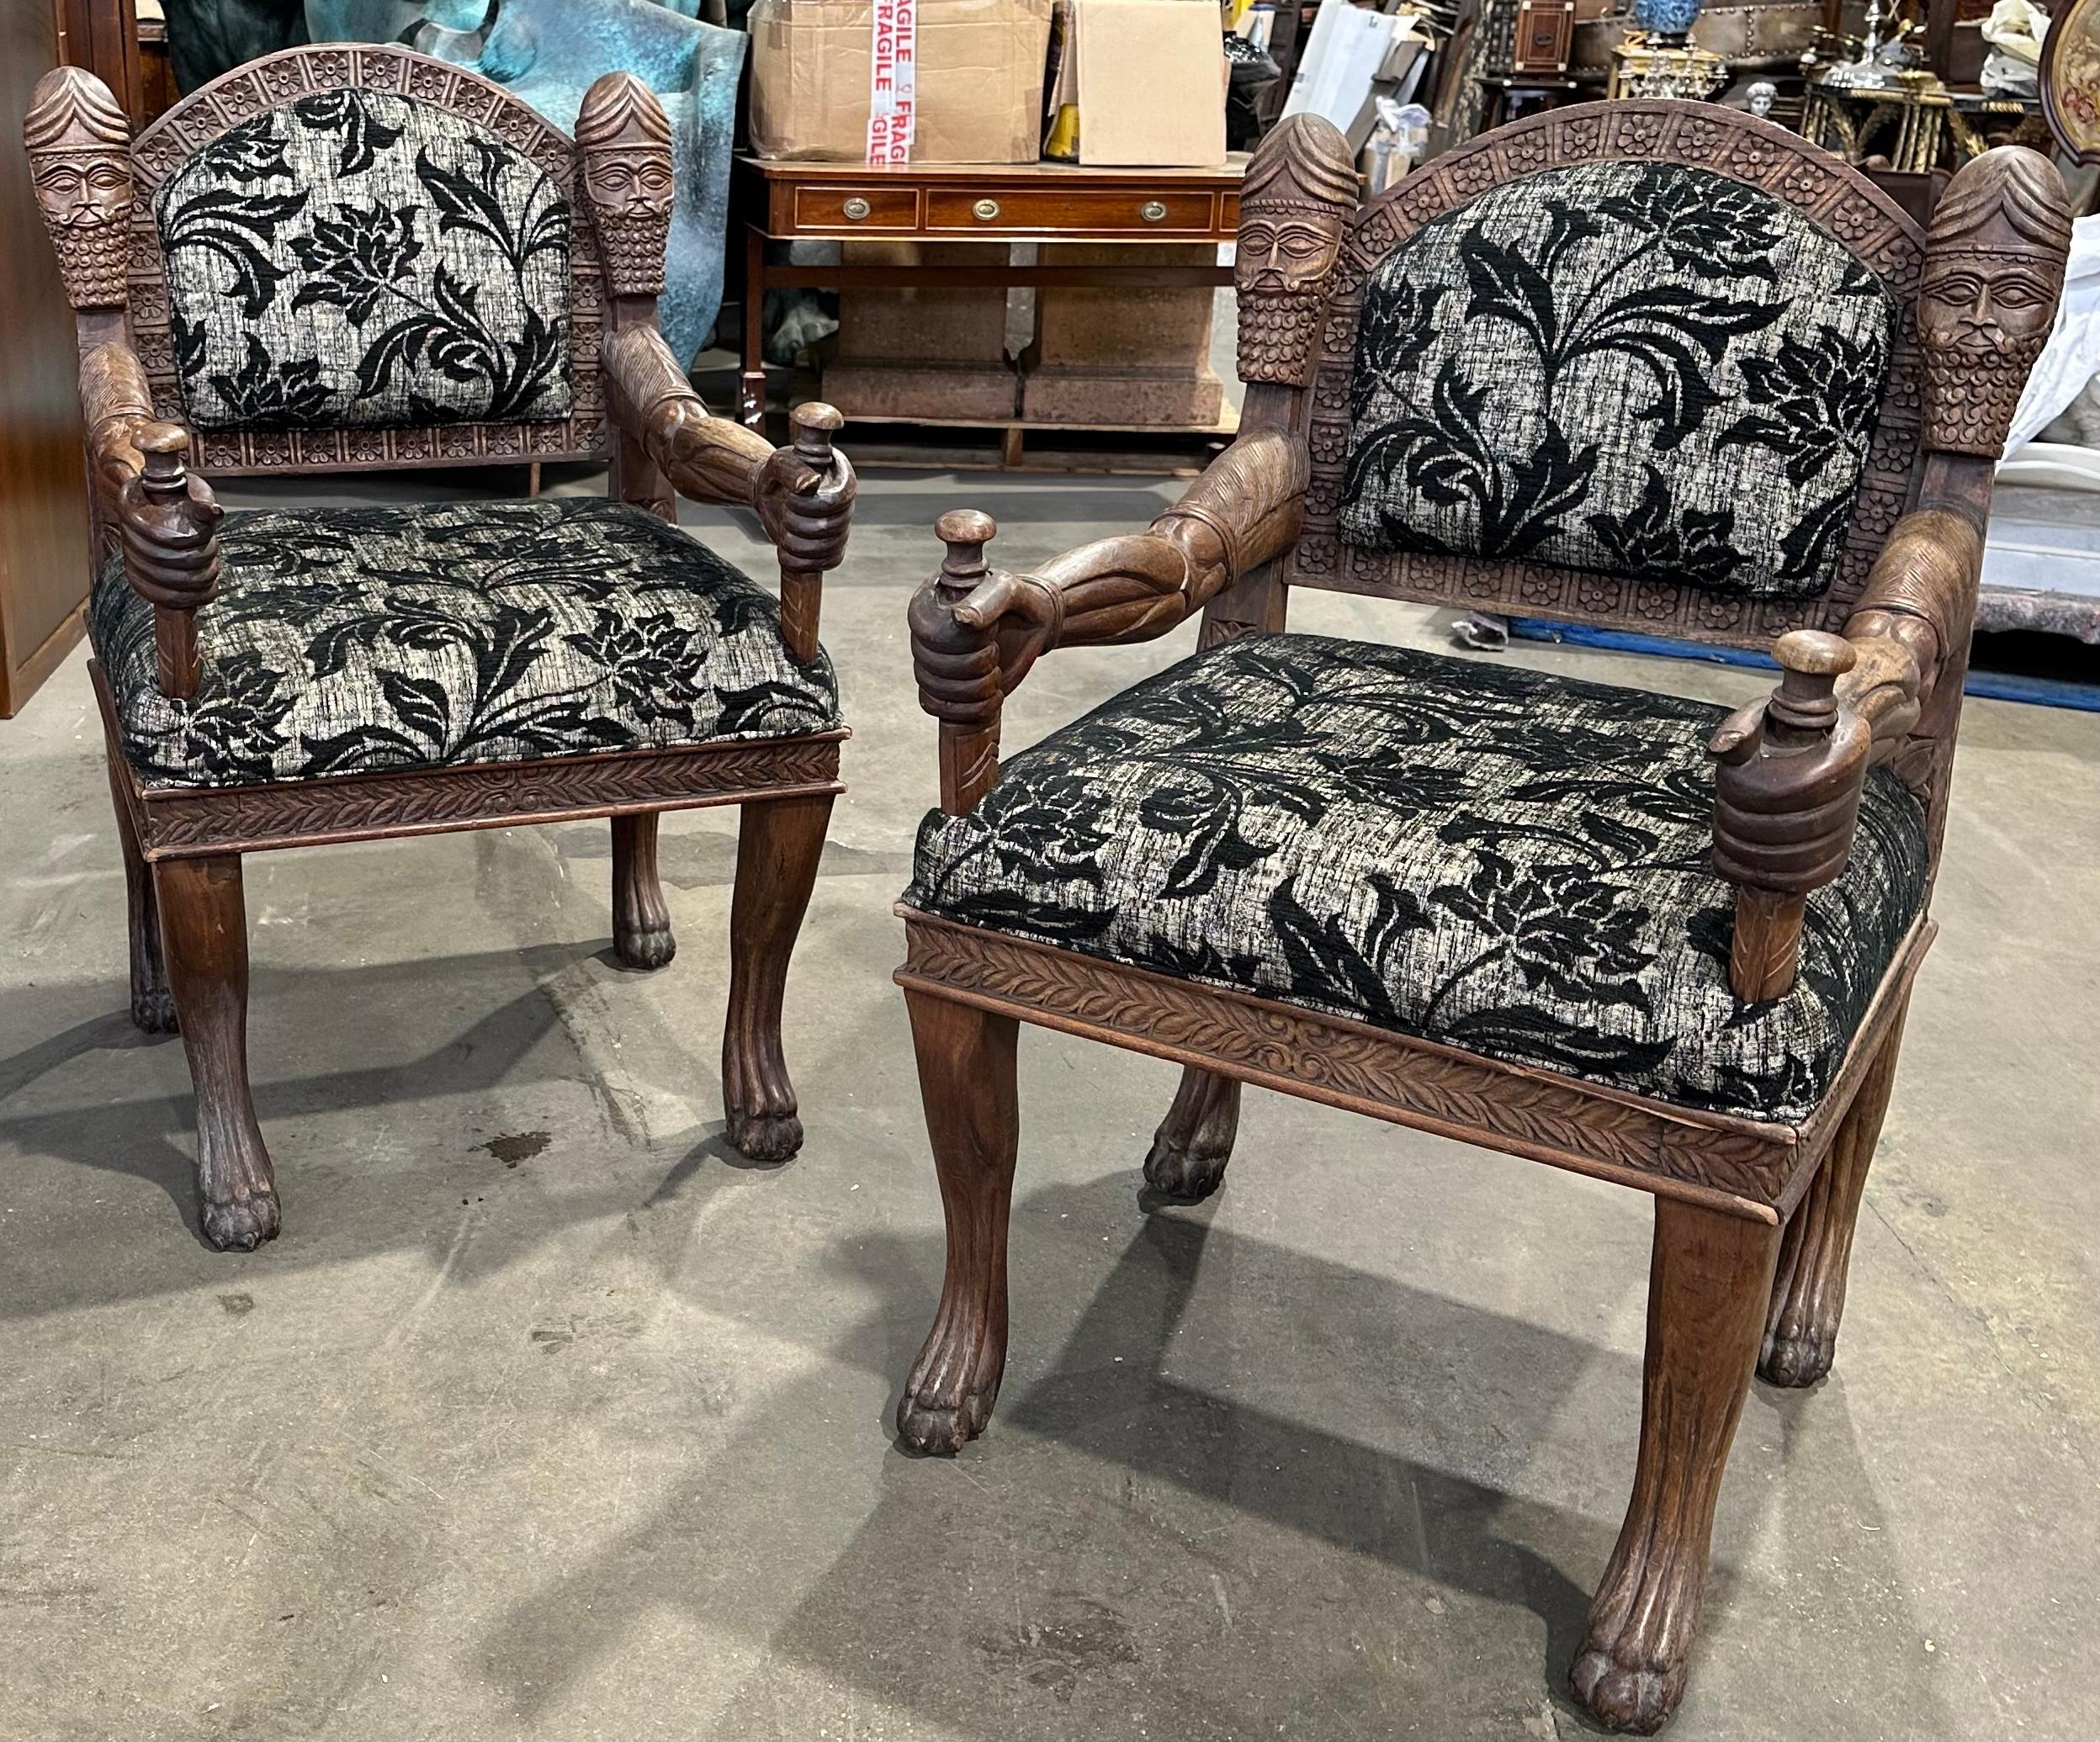 A unusual and decorative pair of hardwood armchairs, upholstered in floral motif fabric. Hand carved with handsome male profiles and curled beards on the chair arms. There is a beautifully carved scene depicting a lion and his prey on the chair